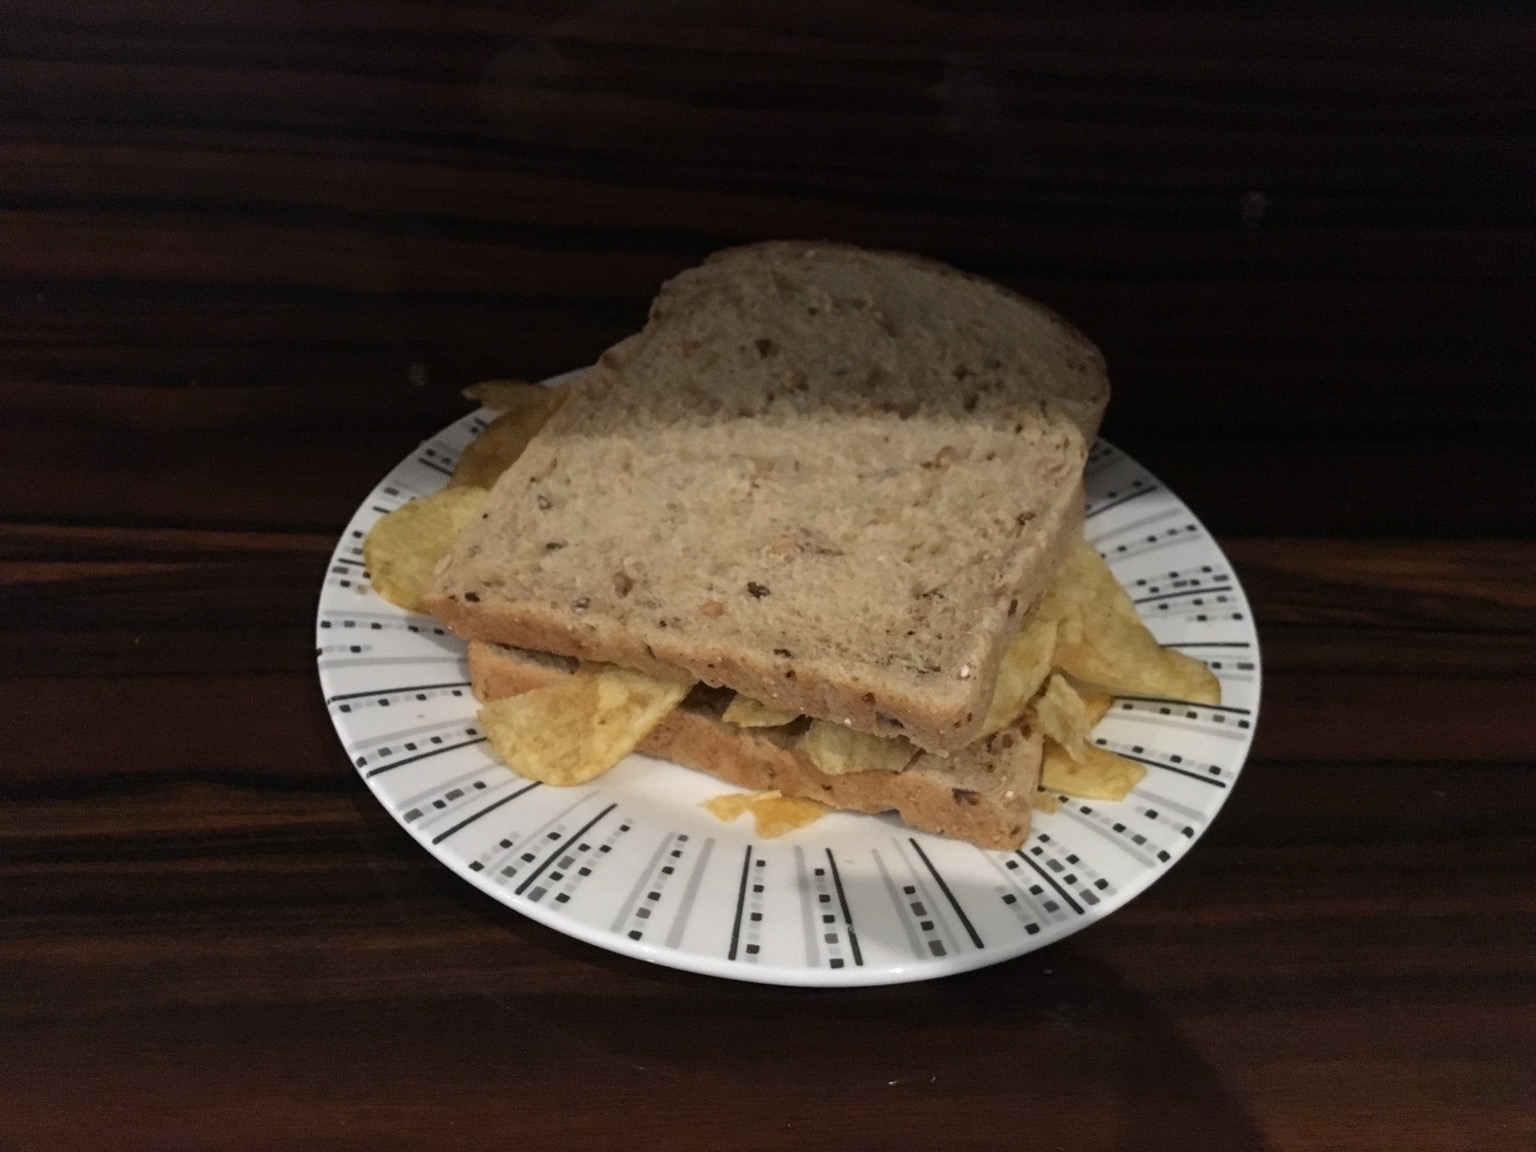 Partially-shaded brown crisp sandwich